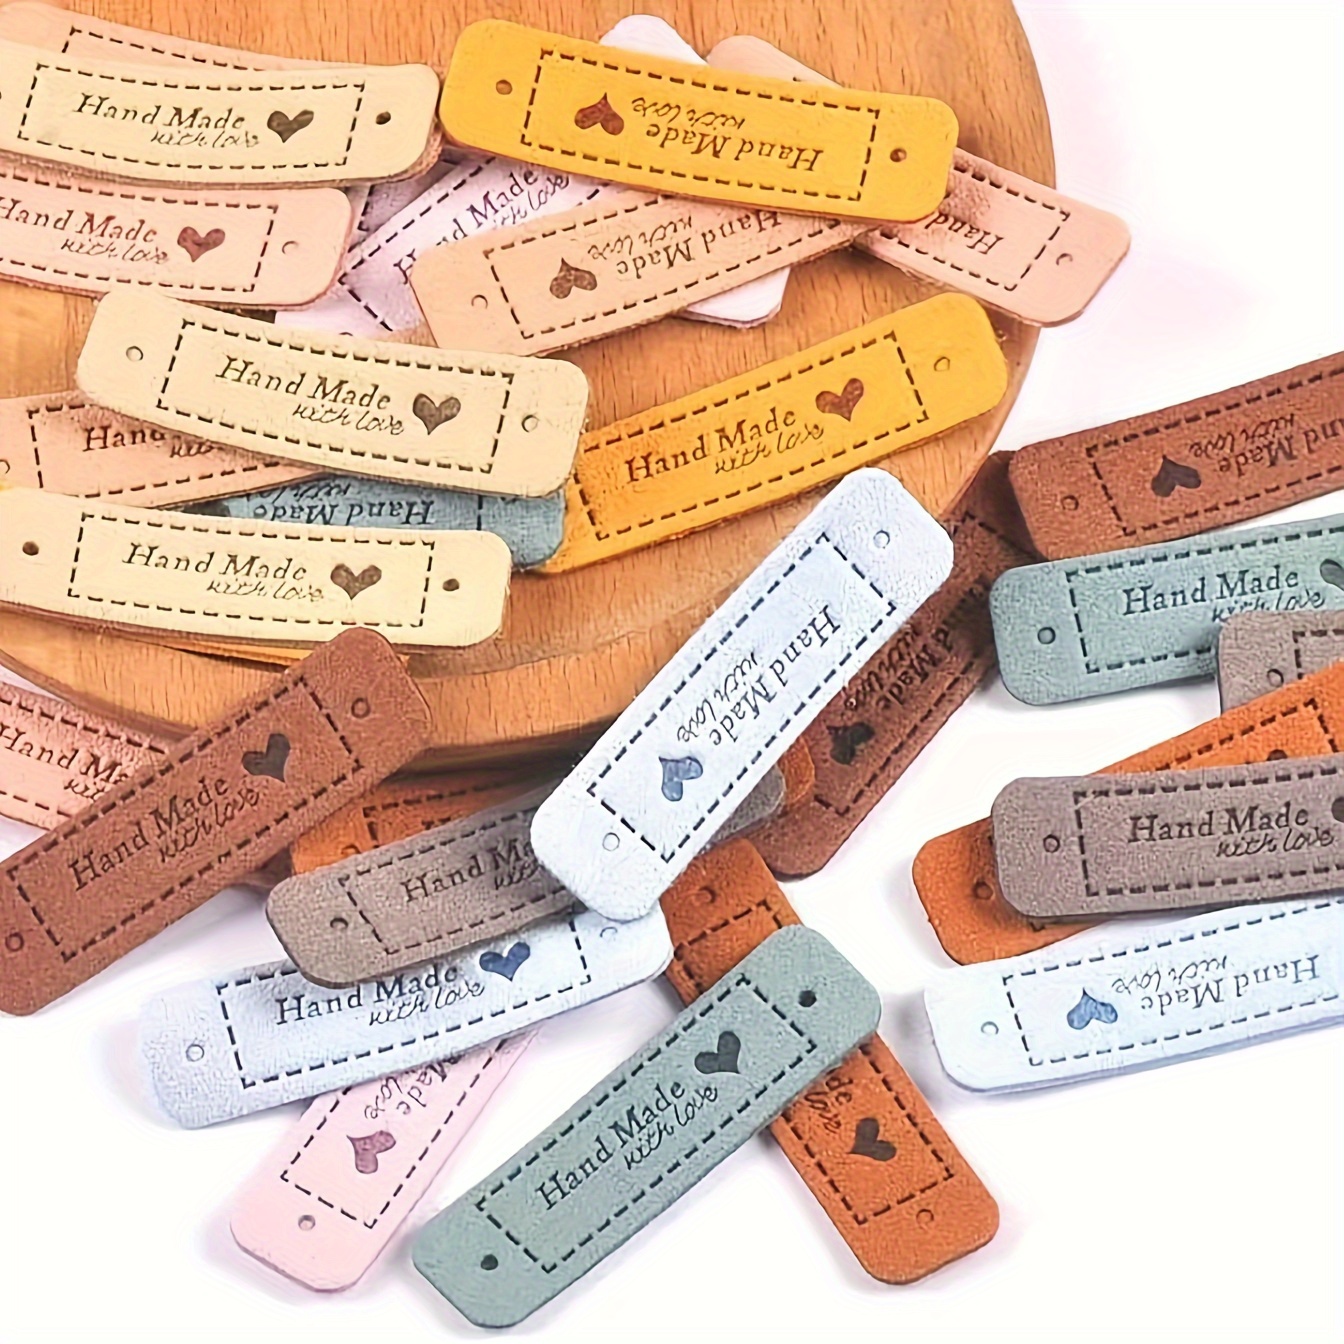  60 Pcs Handmade Leather Labels, Colorful Crochet Tags